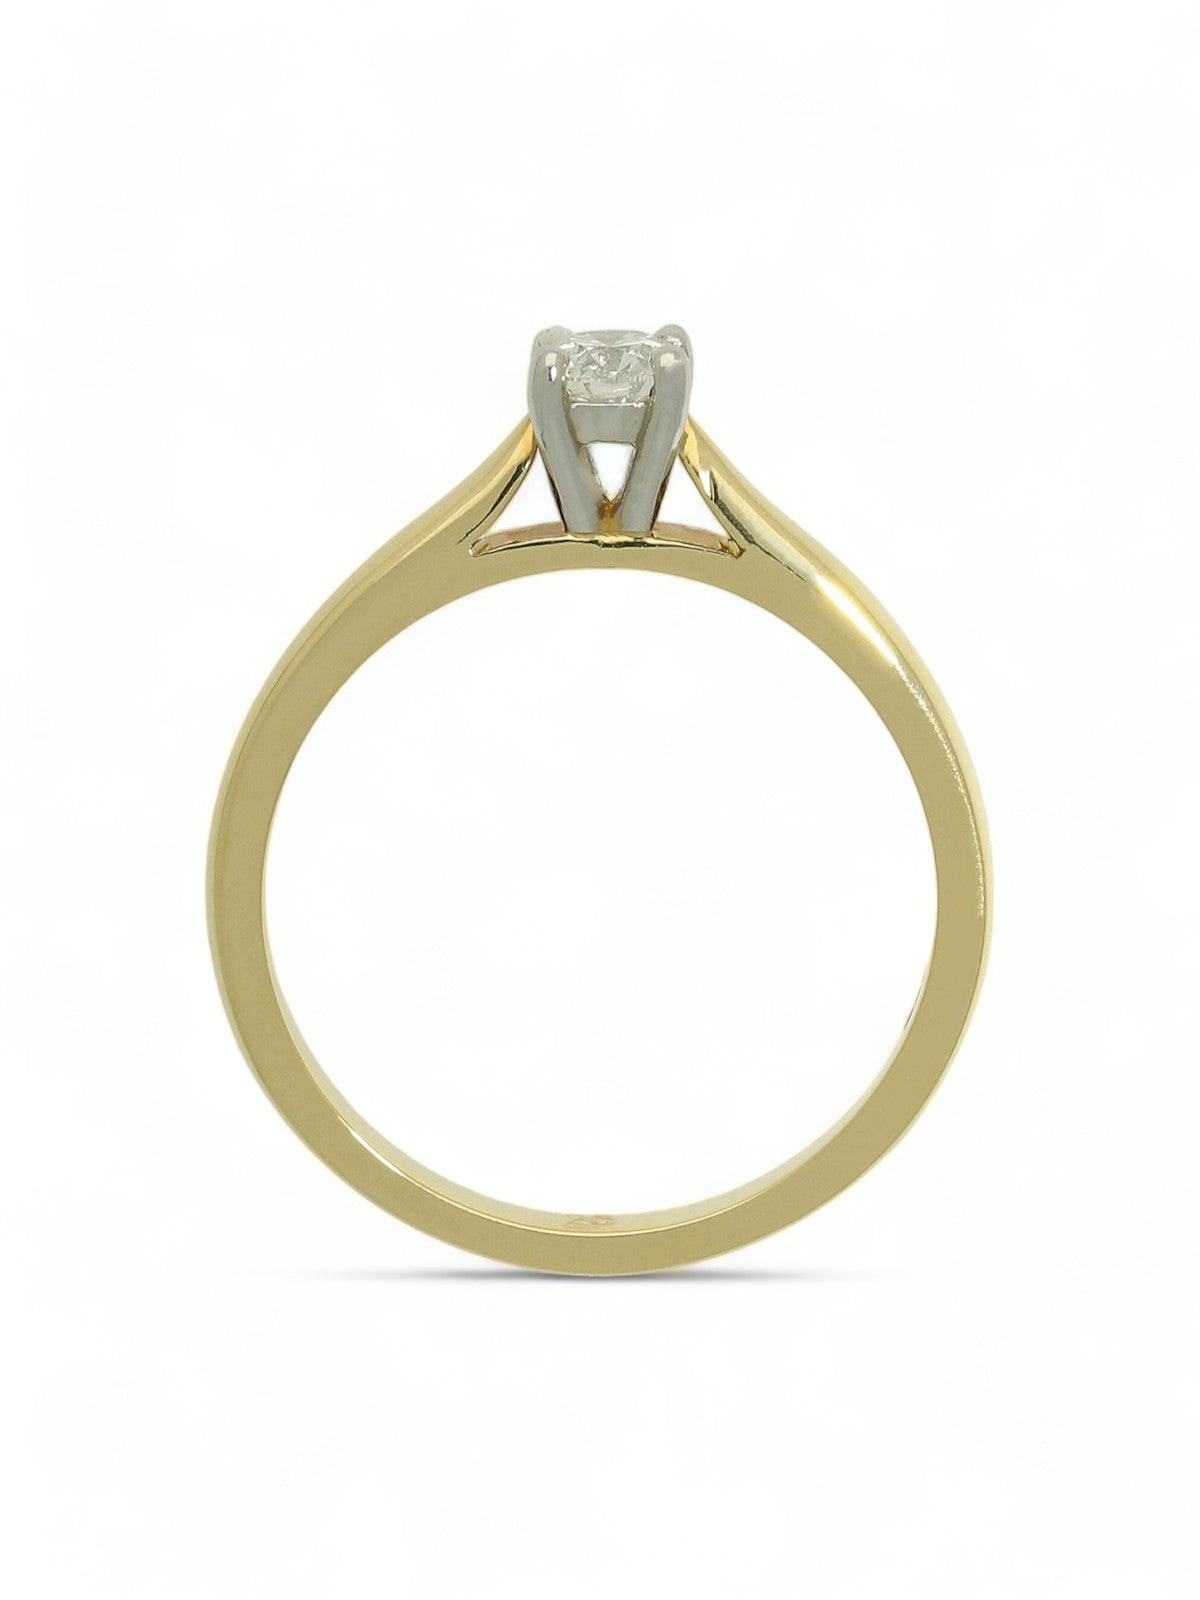 Diamond Solitaire Engagement Ring "The Catherine Collection" 0.25ct Round Brilliant Cut in 18ct Yellow Gold & Platinum